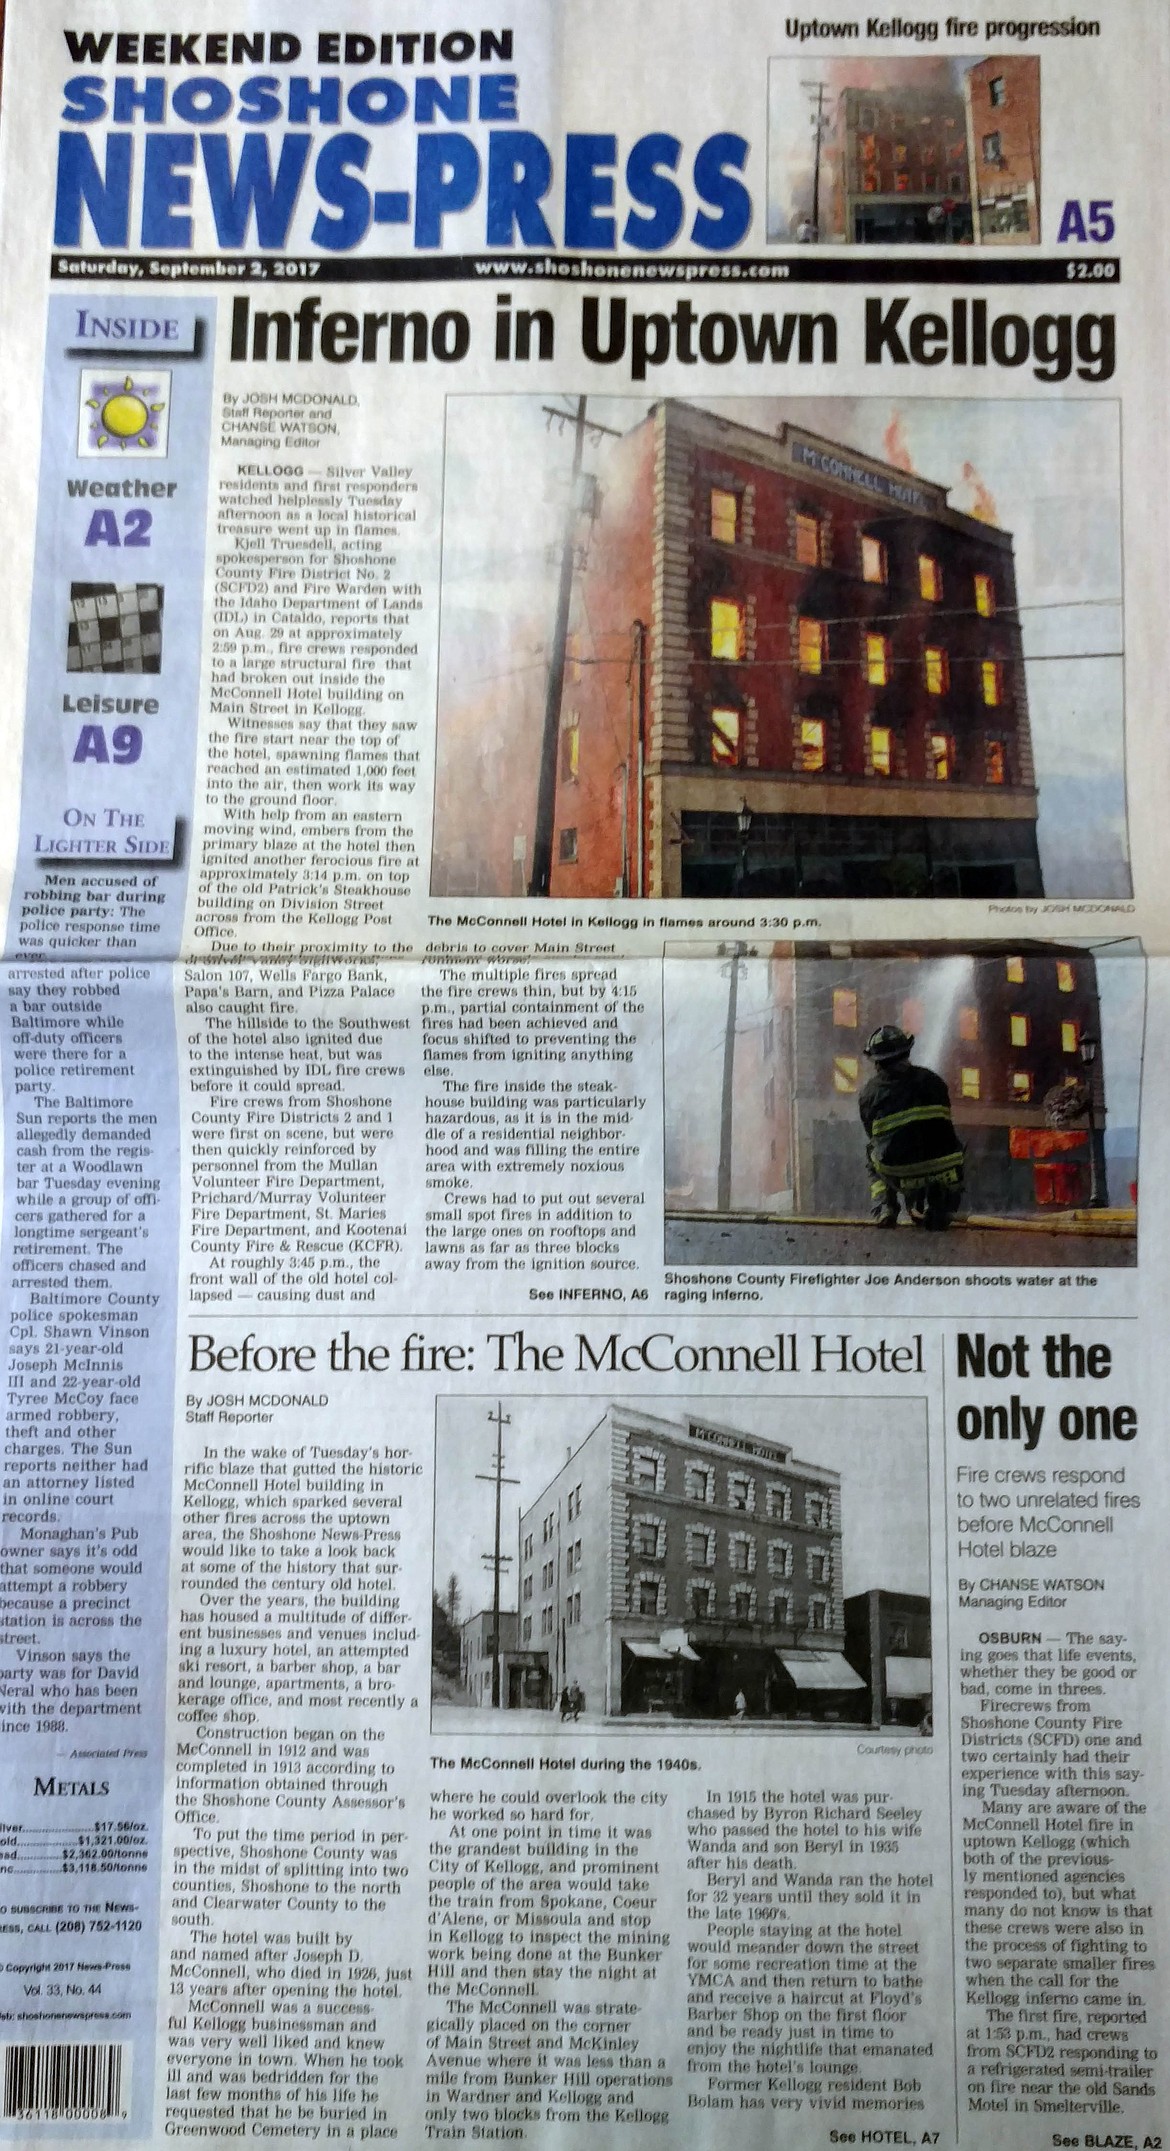 The McConnell Hotel Fire.